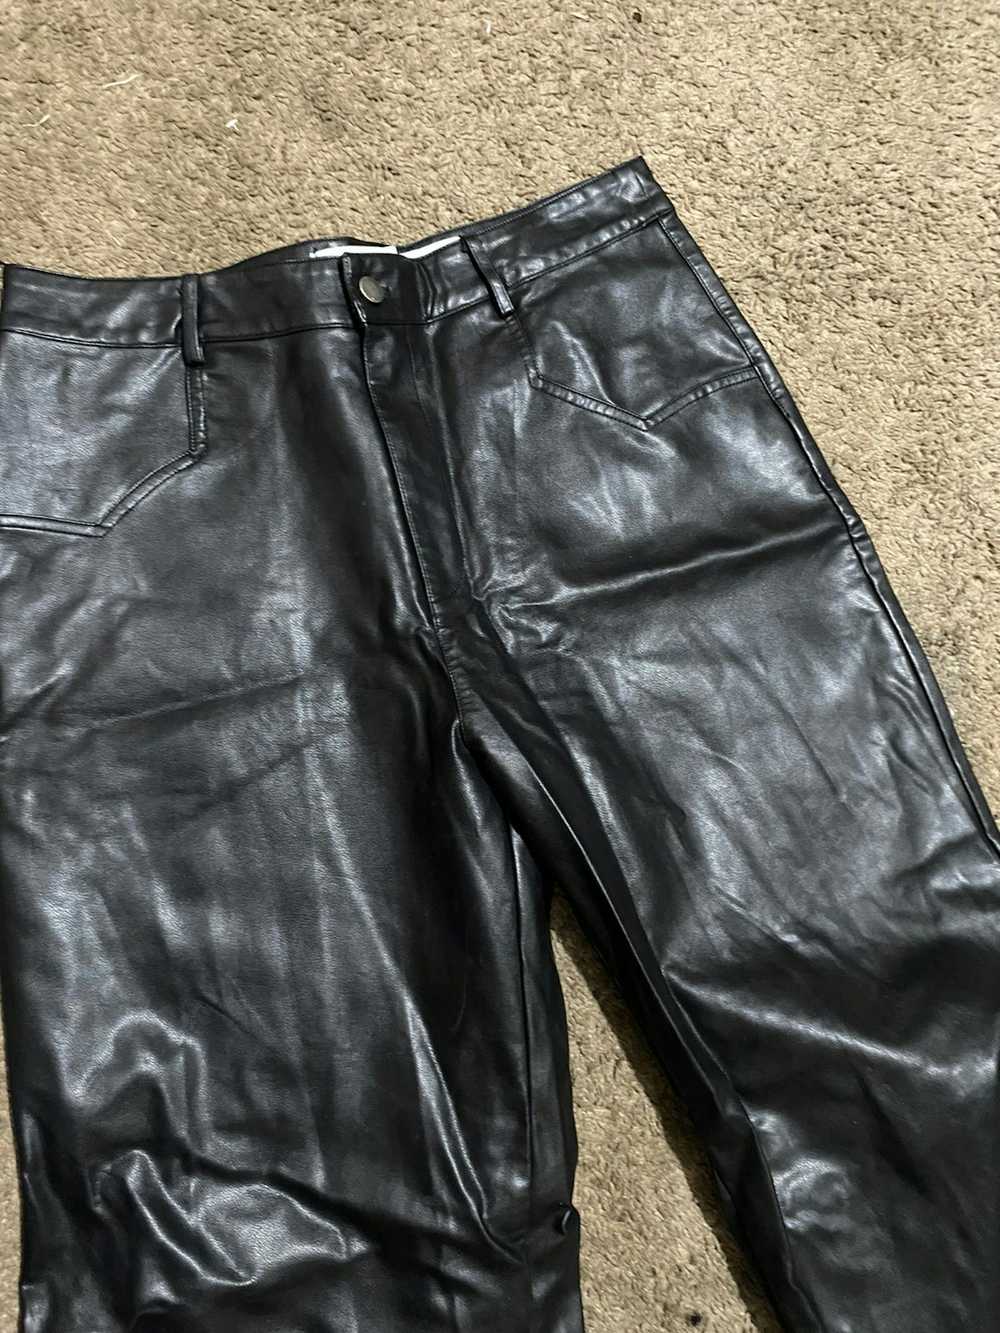 Other × Streetwear rustial leather pants - image 8